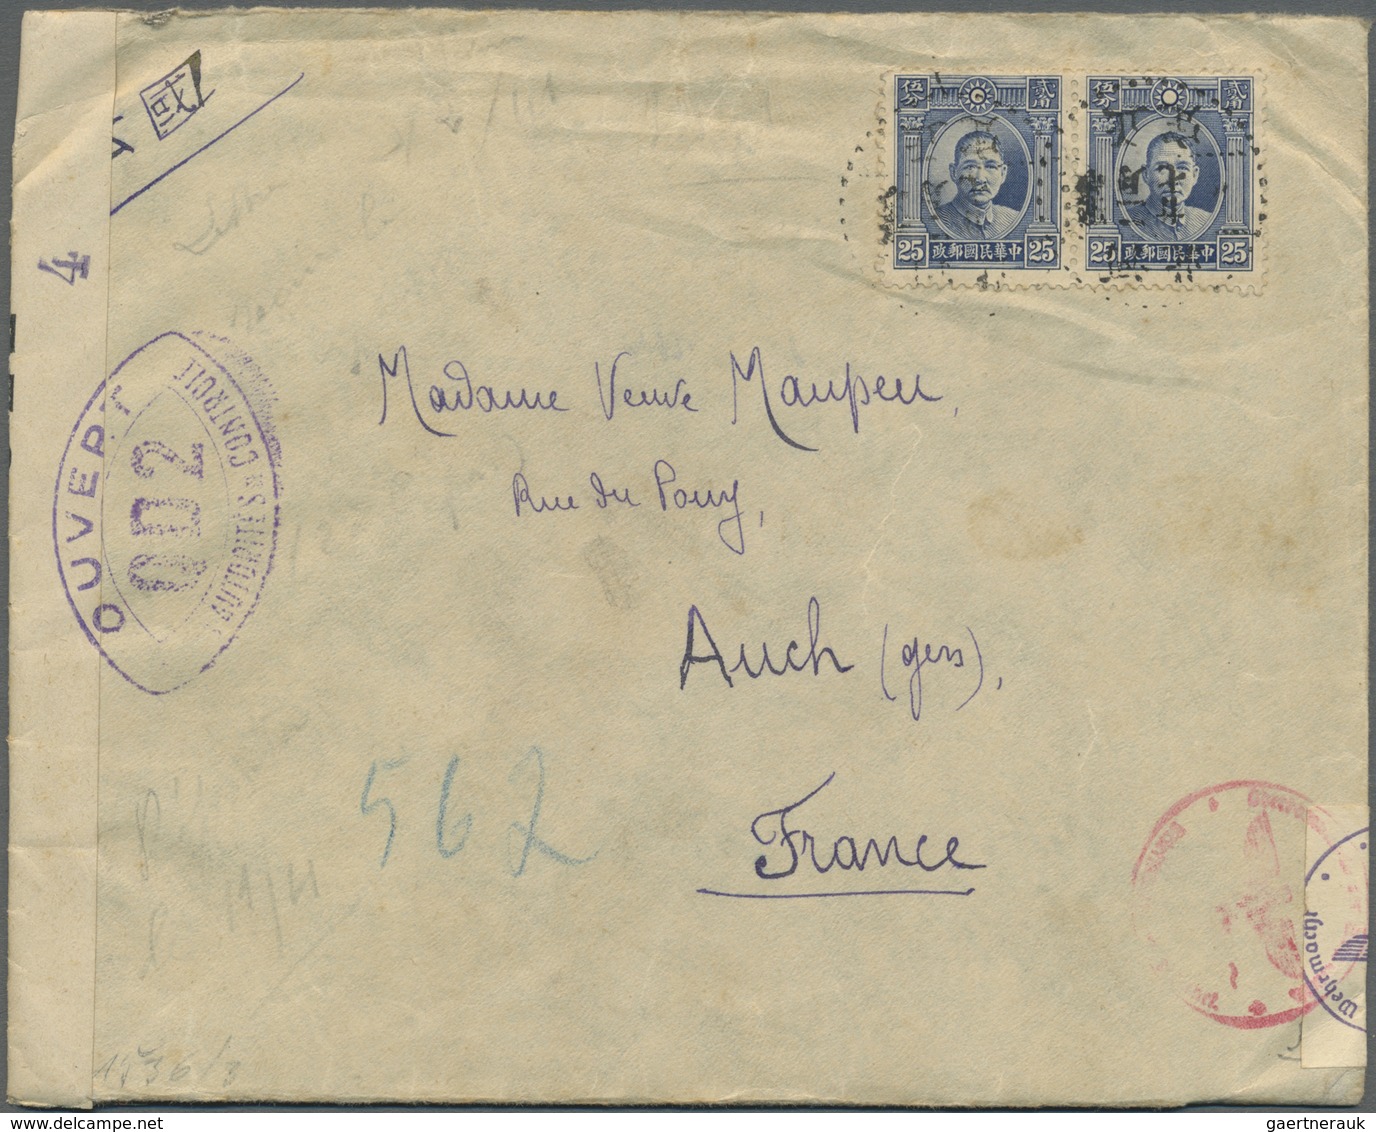 Br China: 1894/1941: Lot with 36 envelopes, picture postcards and postal stationeries as well as 2 used